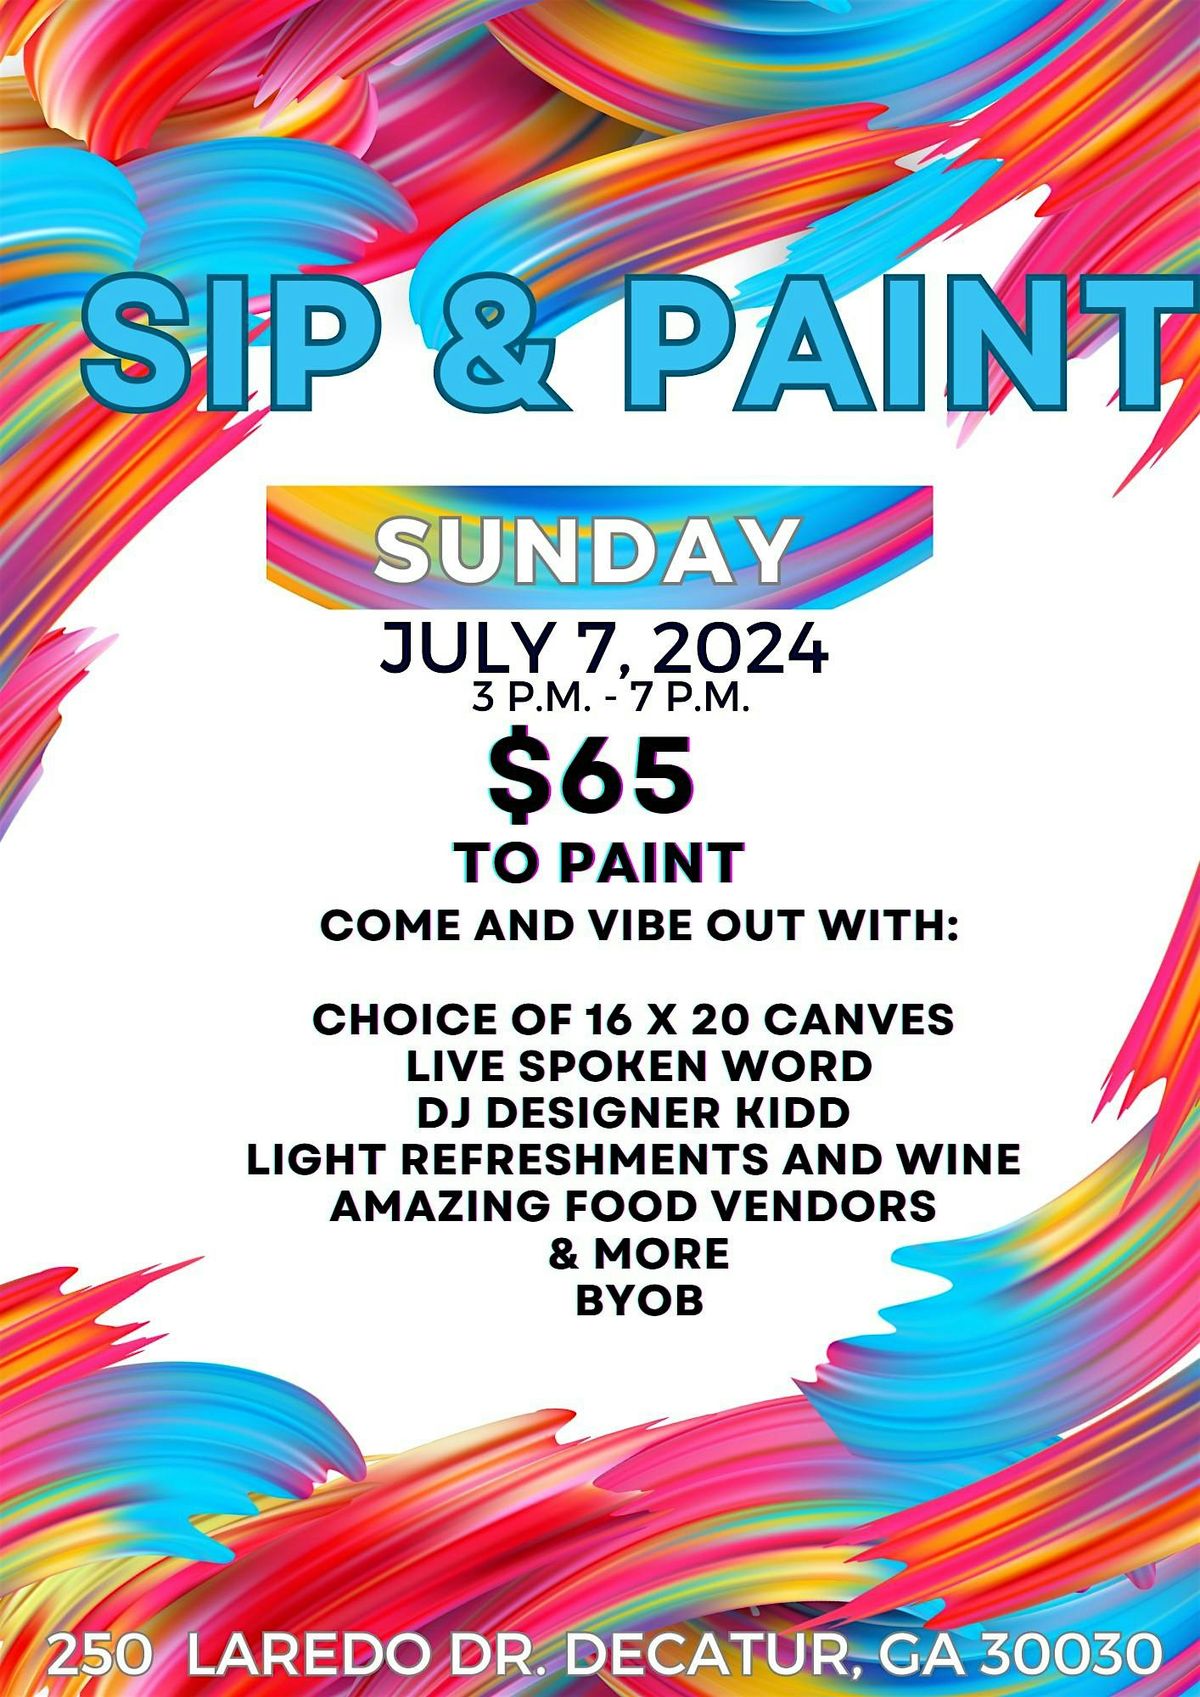 Sapphire's Sip and Paint